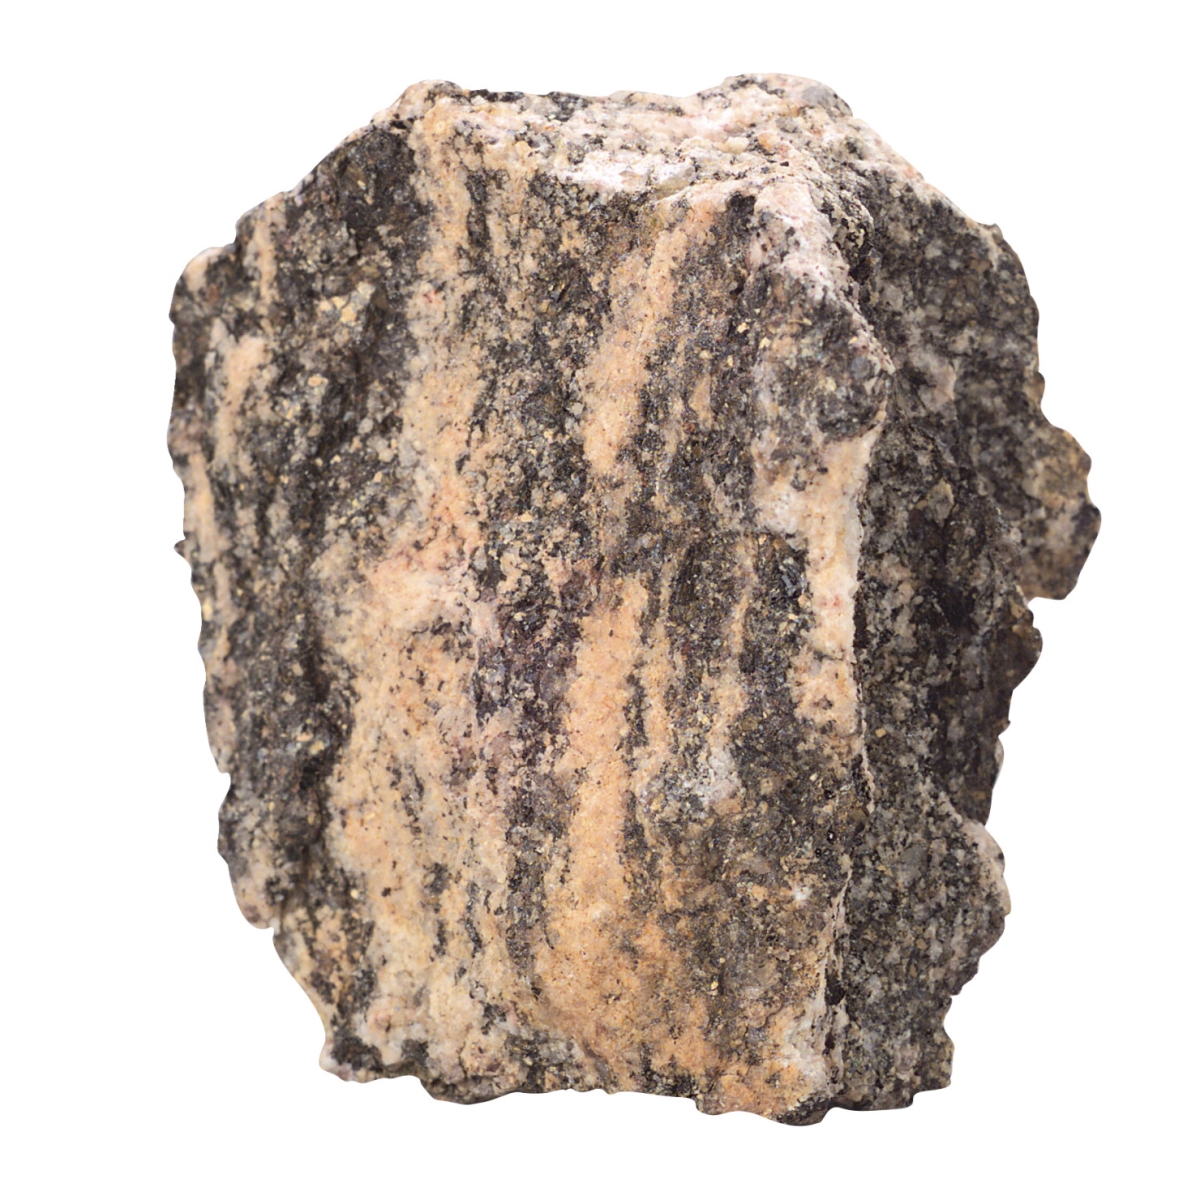 Picture of Geoscience 586405 Scott Resources Hand Sample Coarse-Grained Banded Gneiss